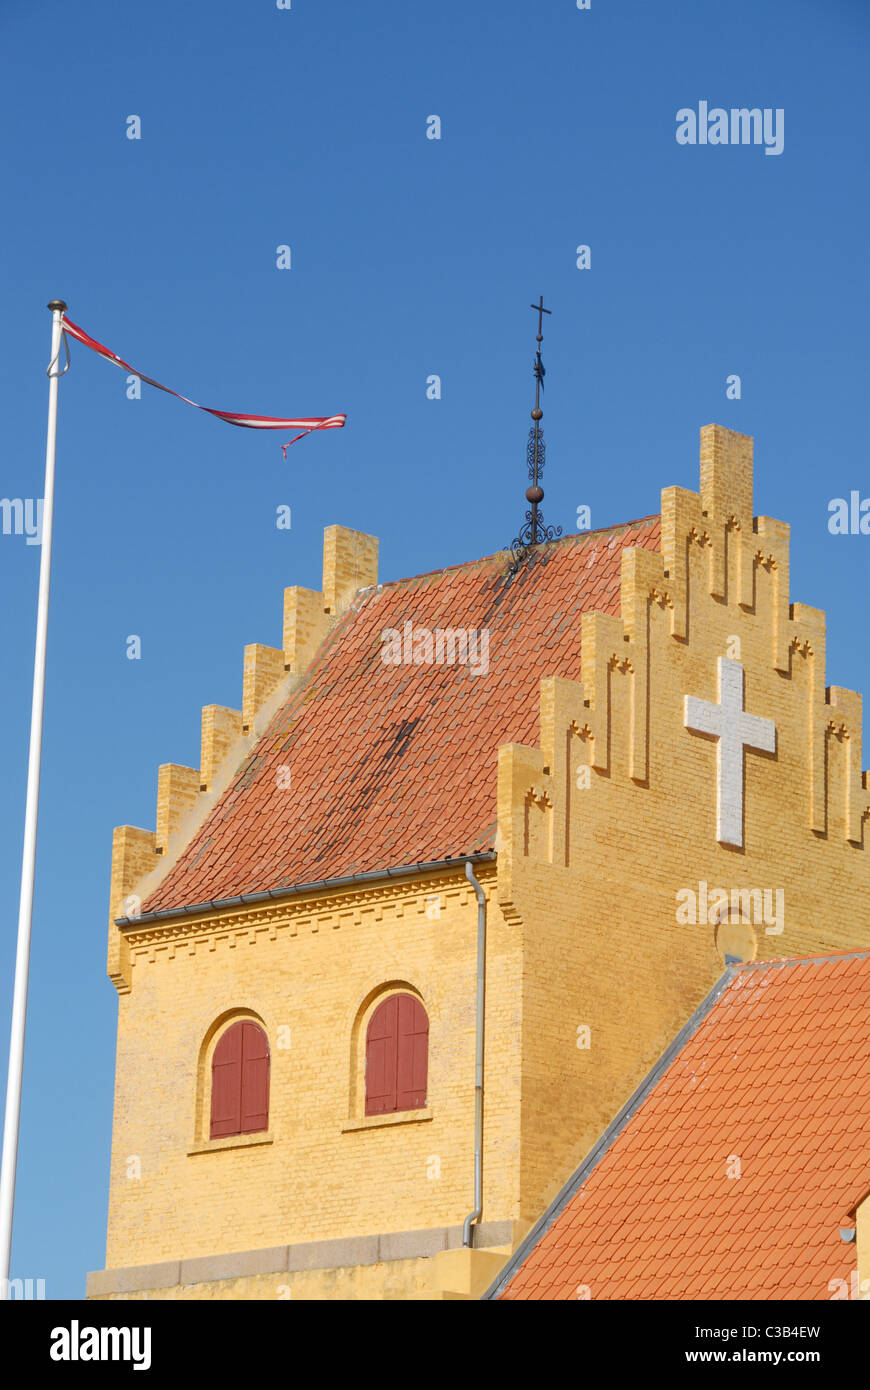 The church of Allinge on the north-eastern coast of the Danish island of Bornholm in the Baltic Sea Stock Photo